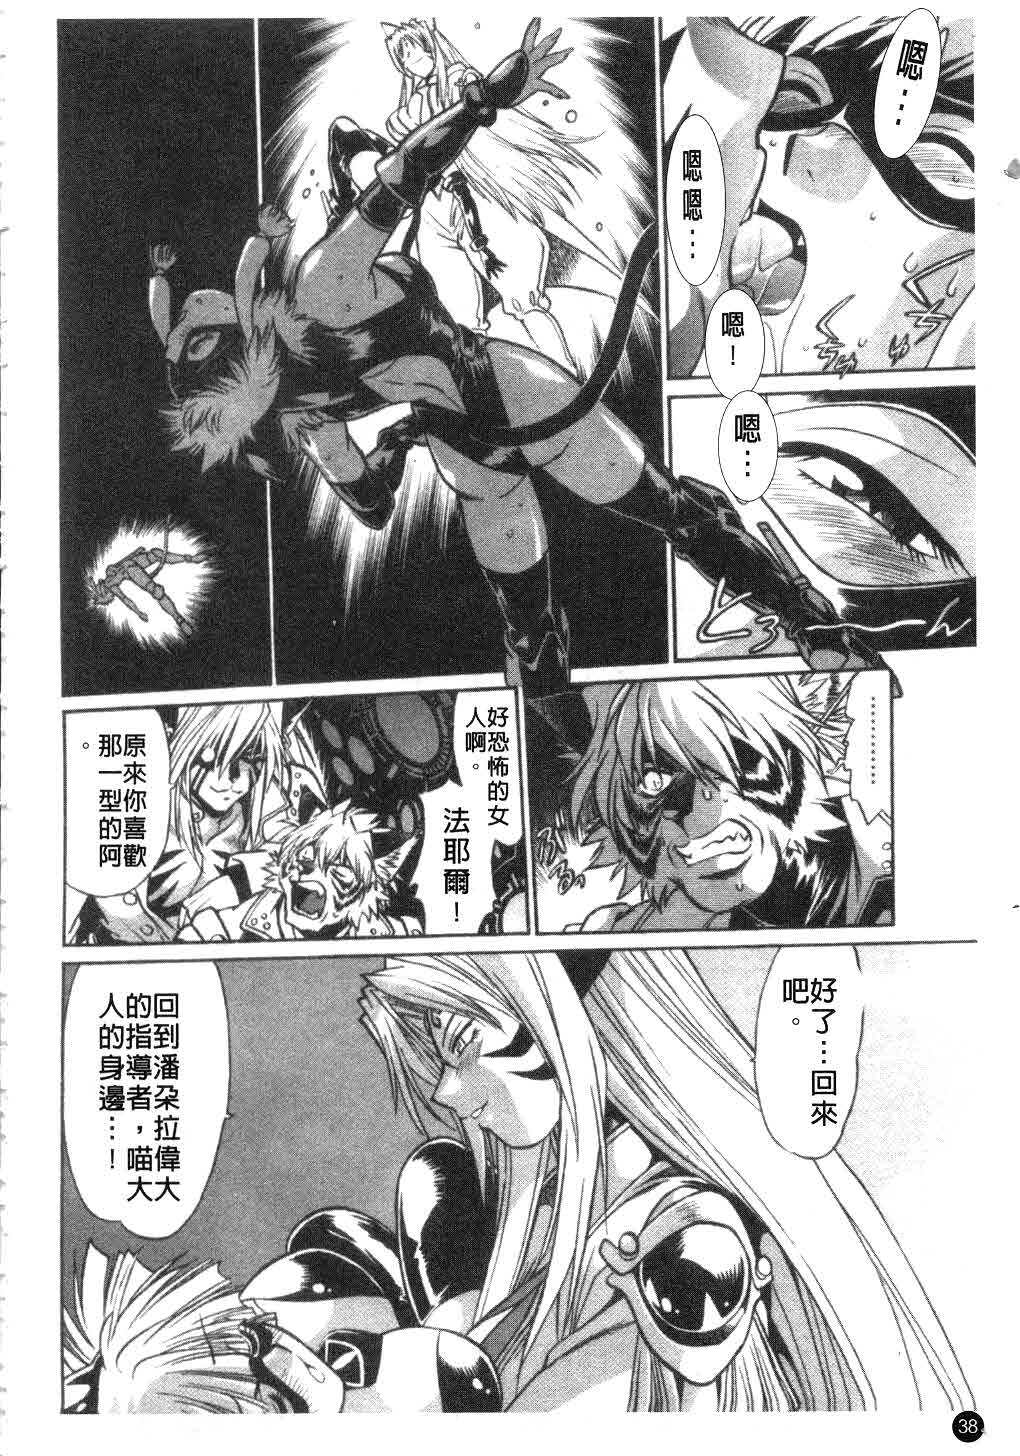 [Manabe Jouji] Tail Chaser 3 | 貓女迷情 3 [Chinese] page 39 full